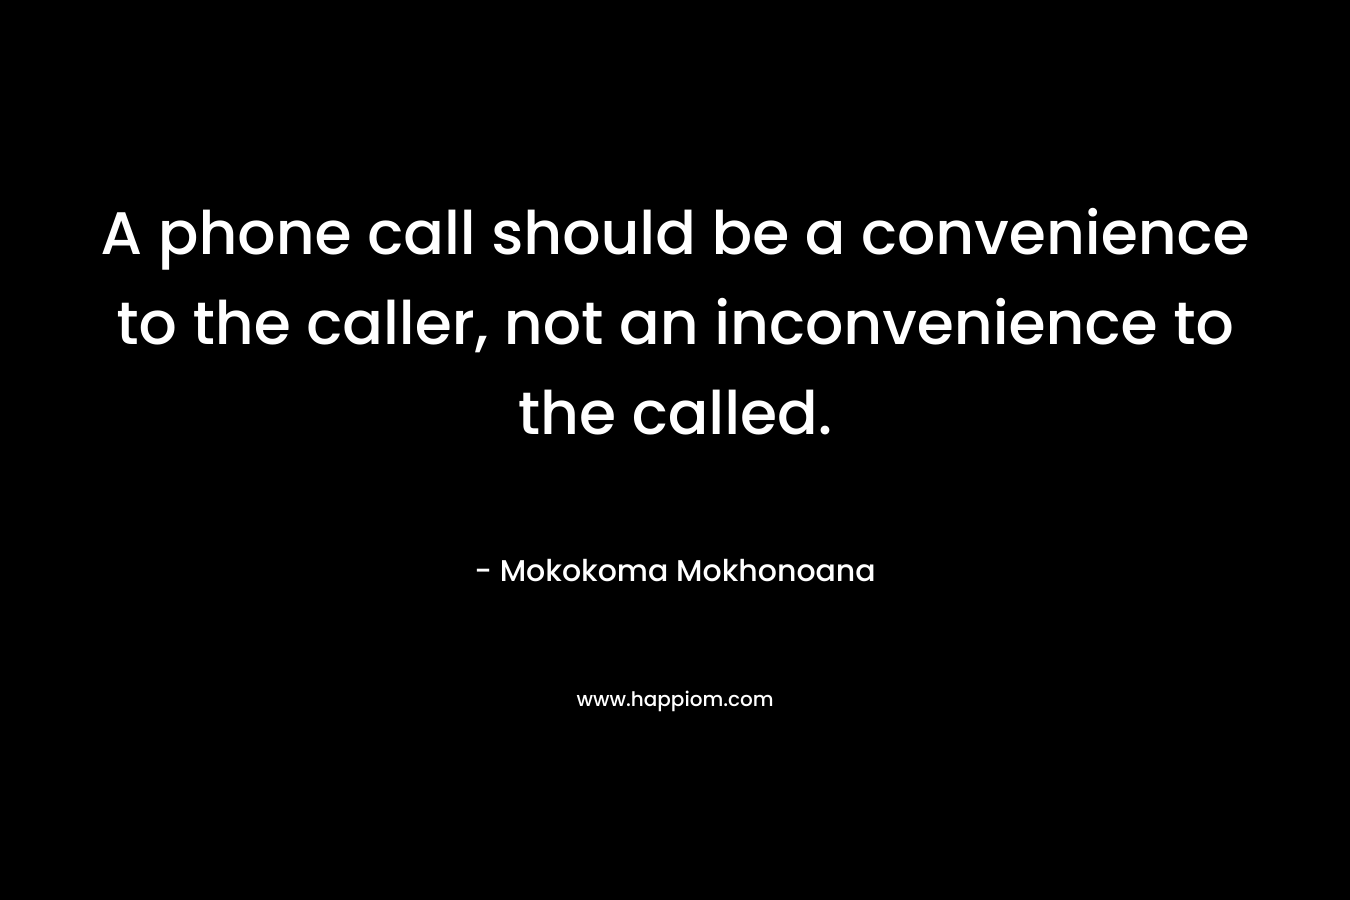 A phone call should be a convenience to the caller, not an inconvenience to the called. – Mokokoma Mokhonoana